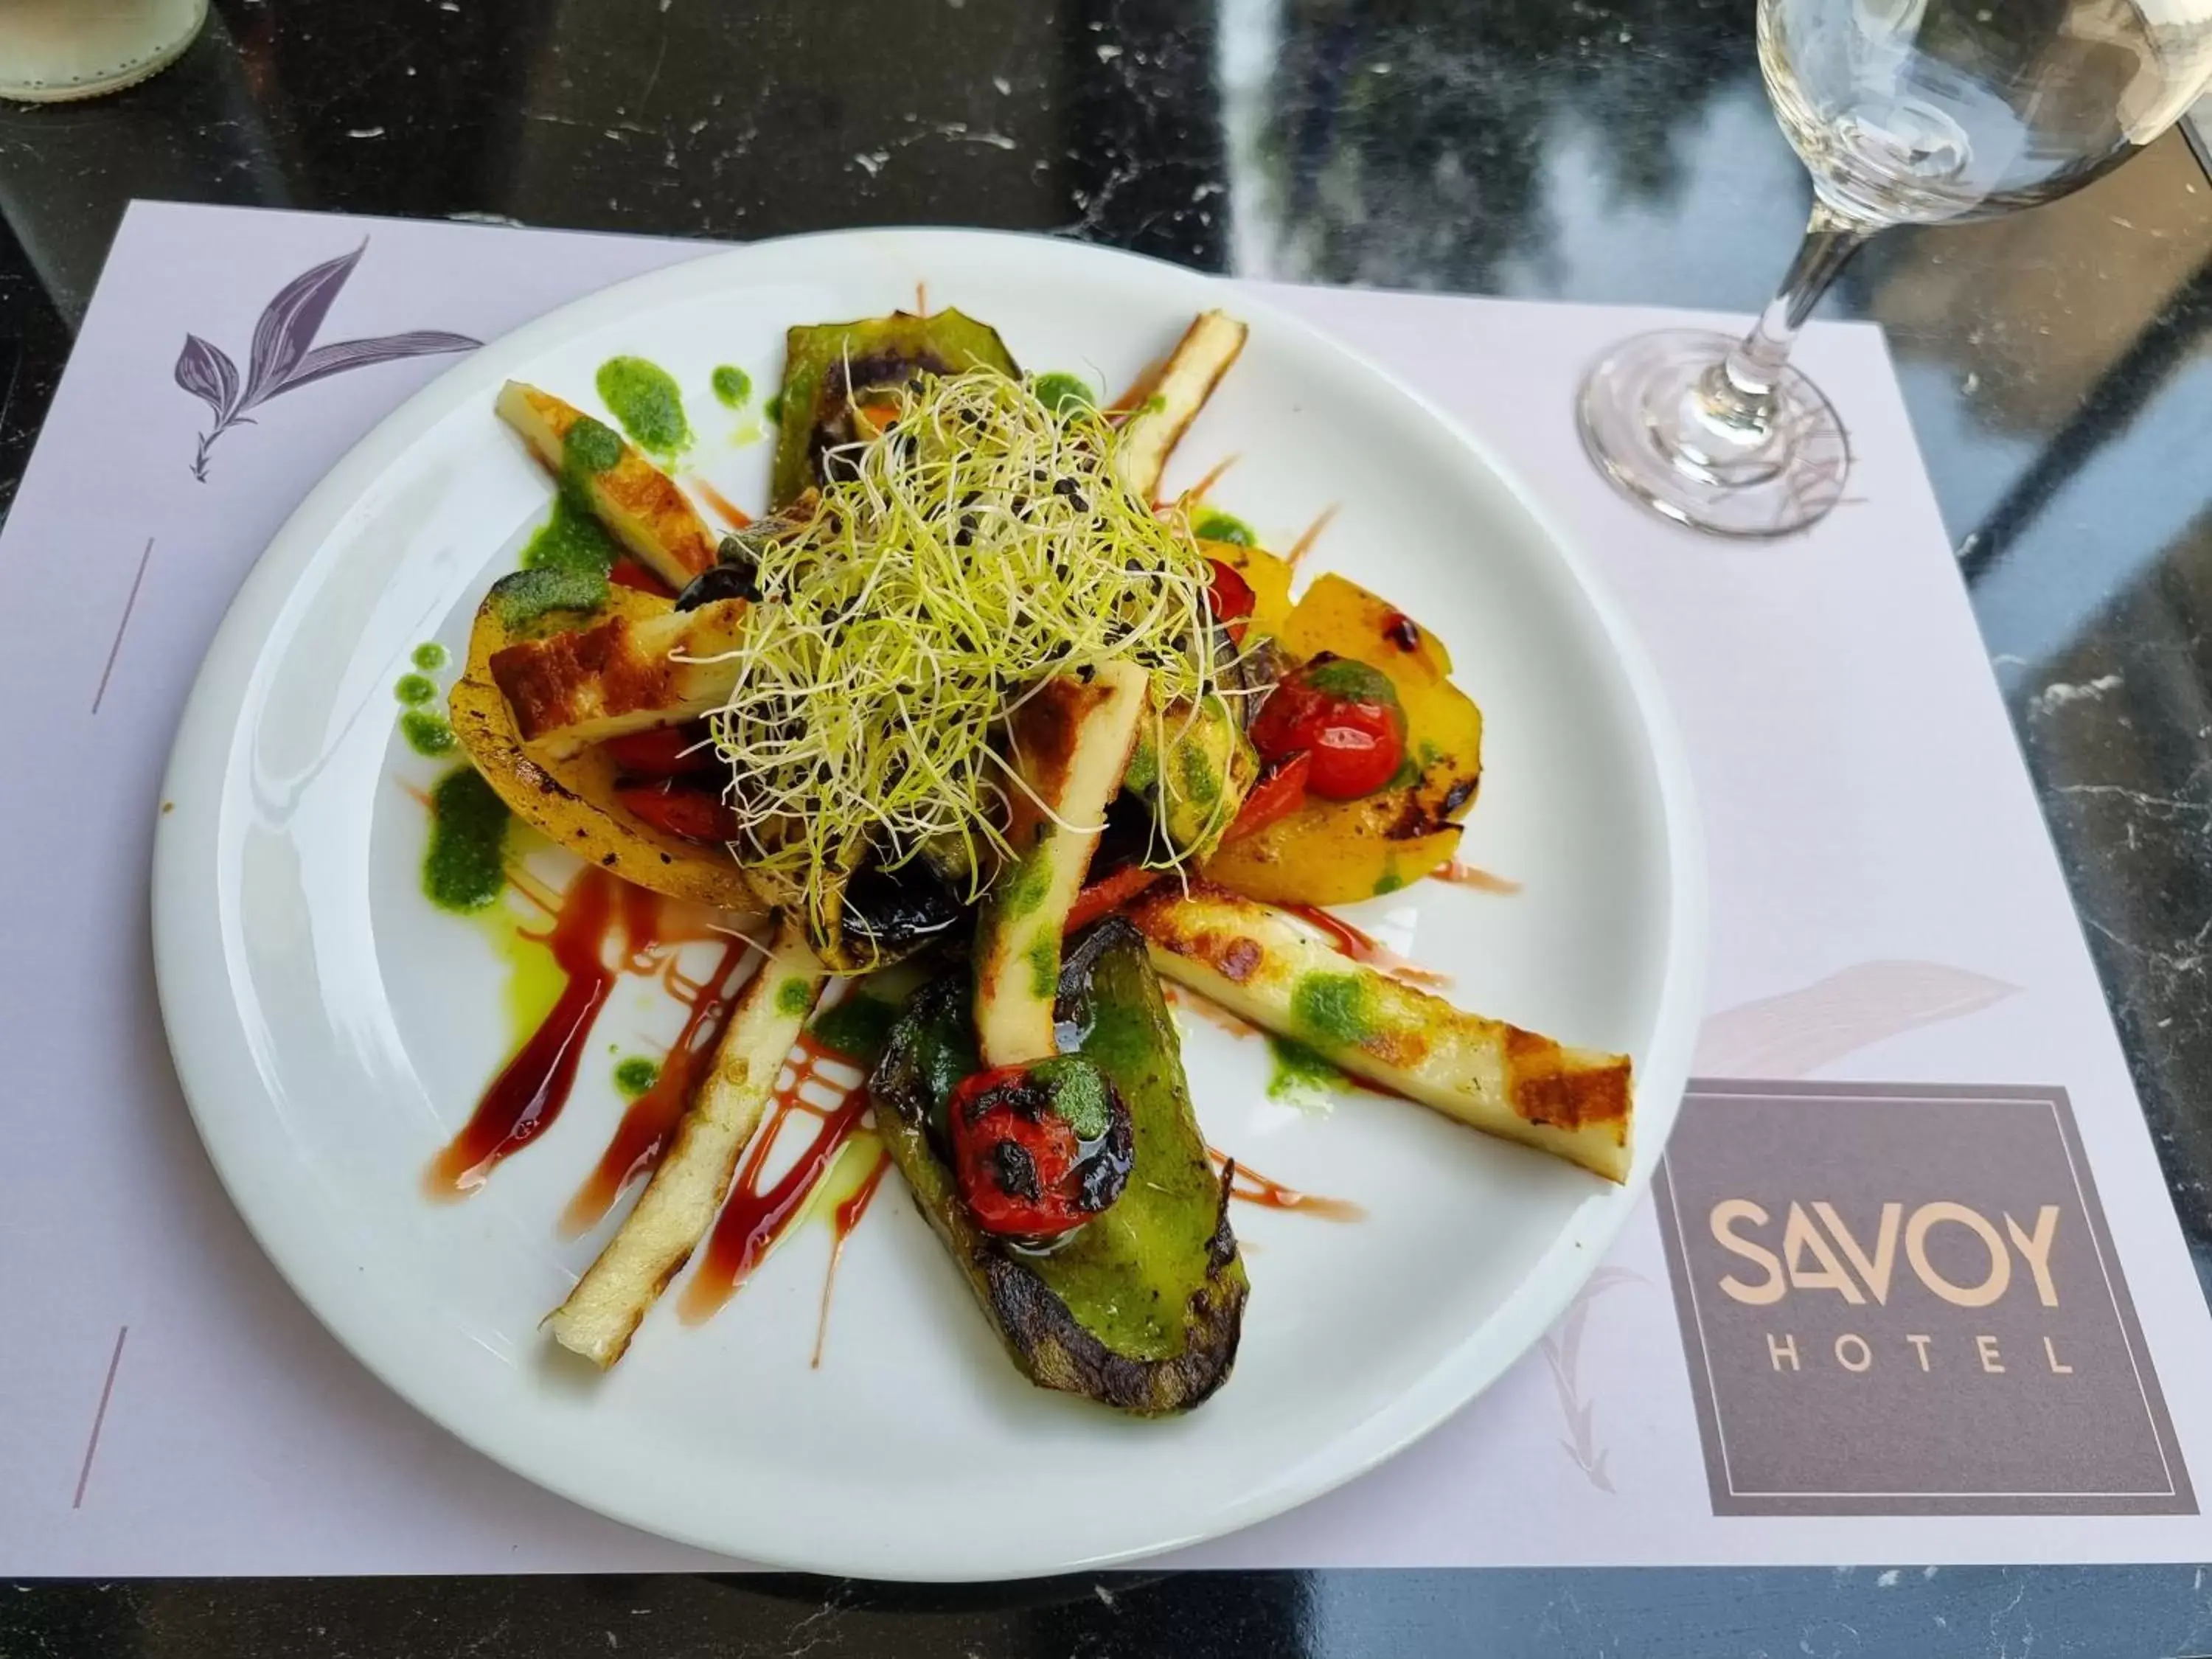 Food in Savoy Hotel